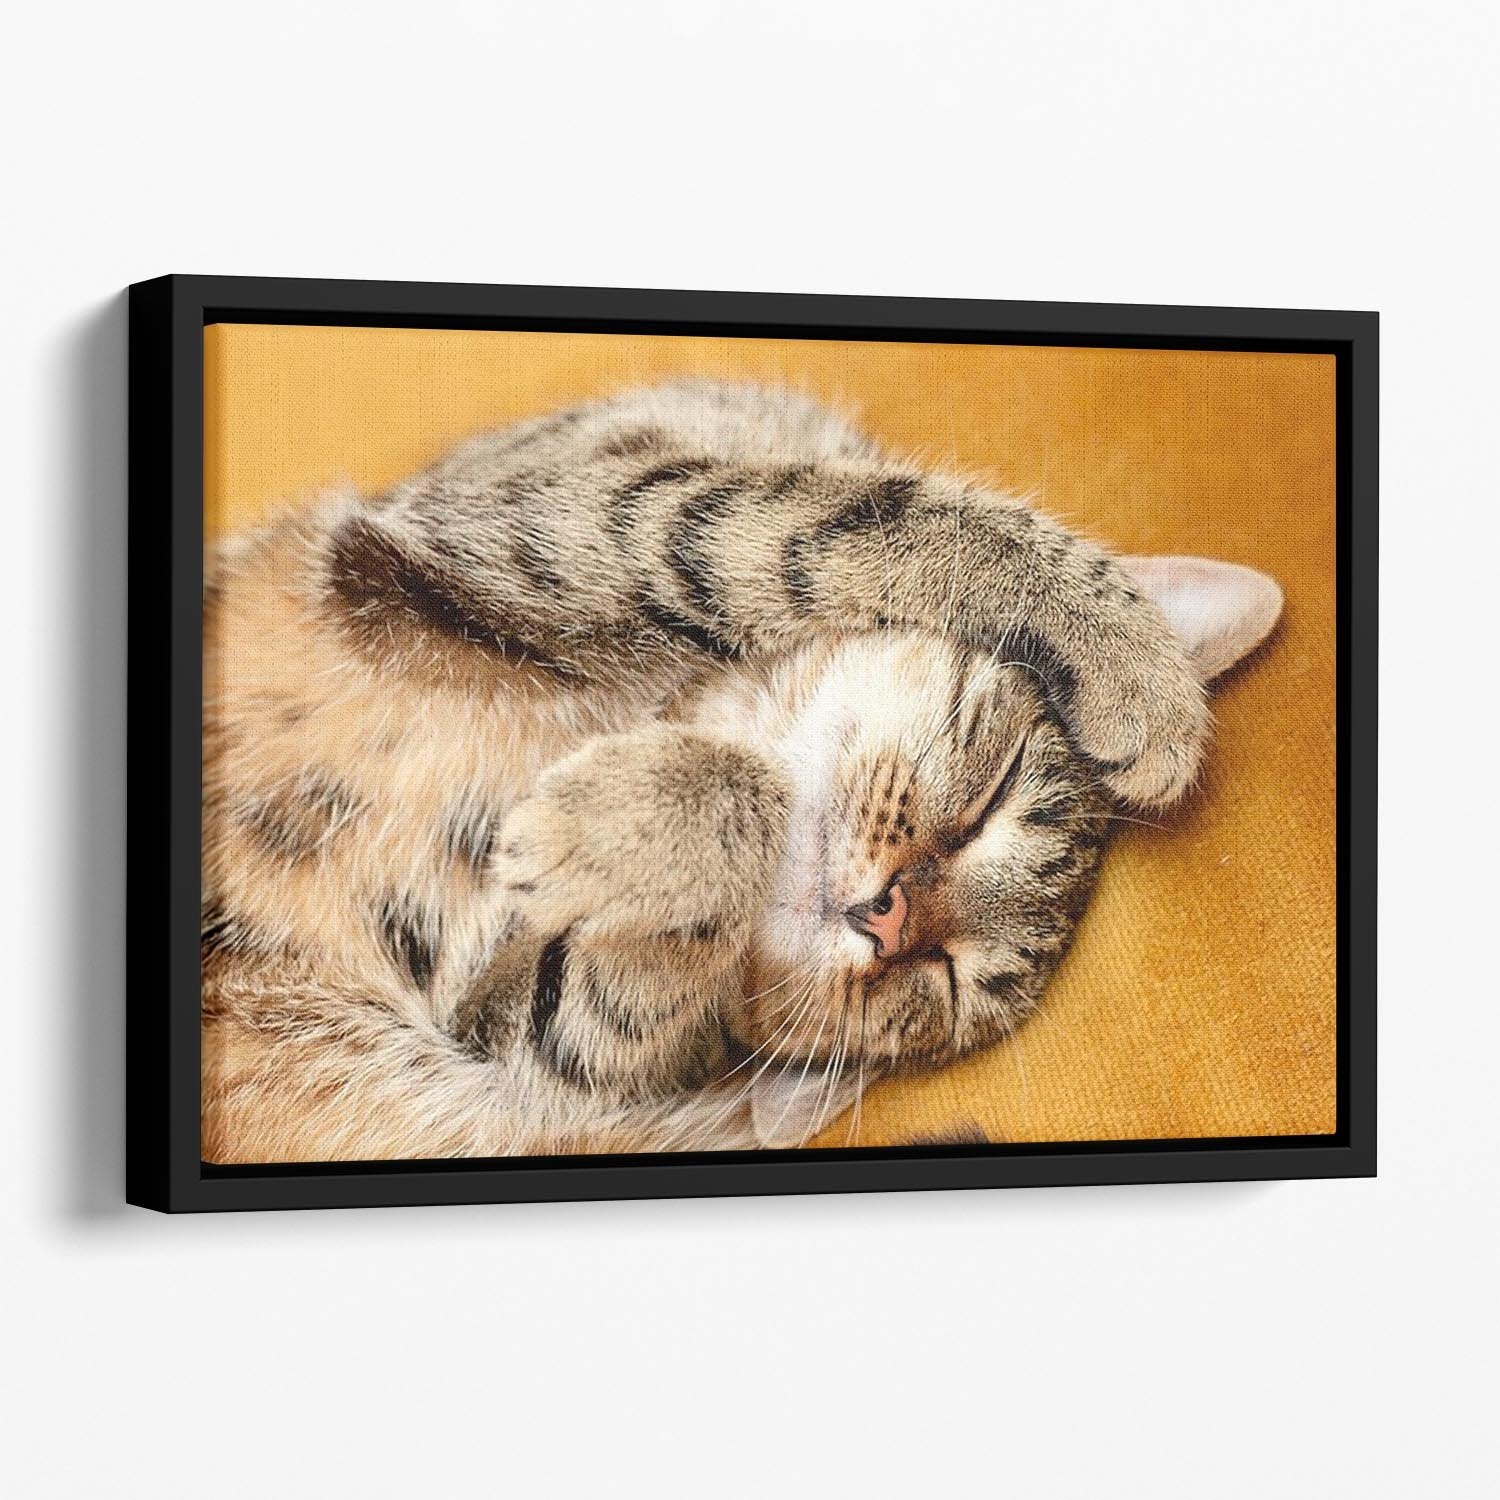 Tabby sweet sleeping on the bed Floating Framed Canvas - Canvas Art Rocks - 1